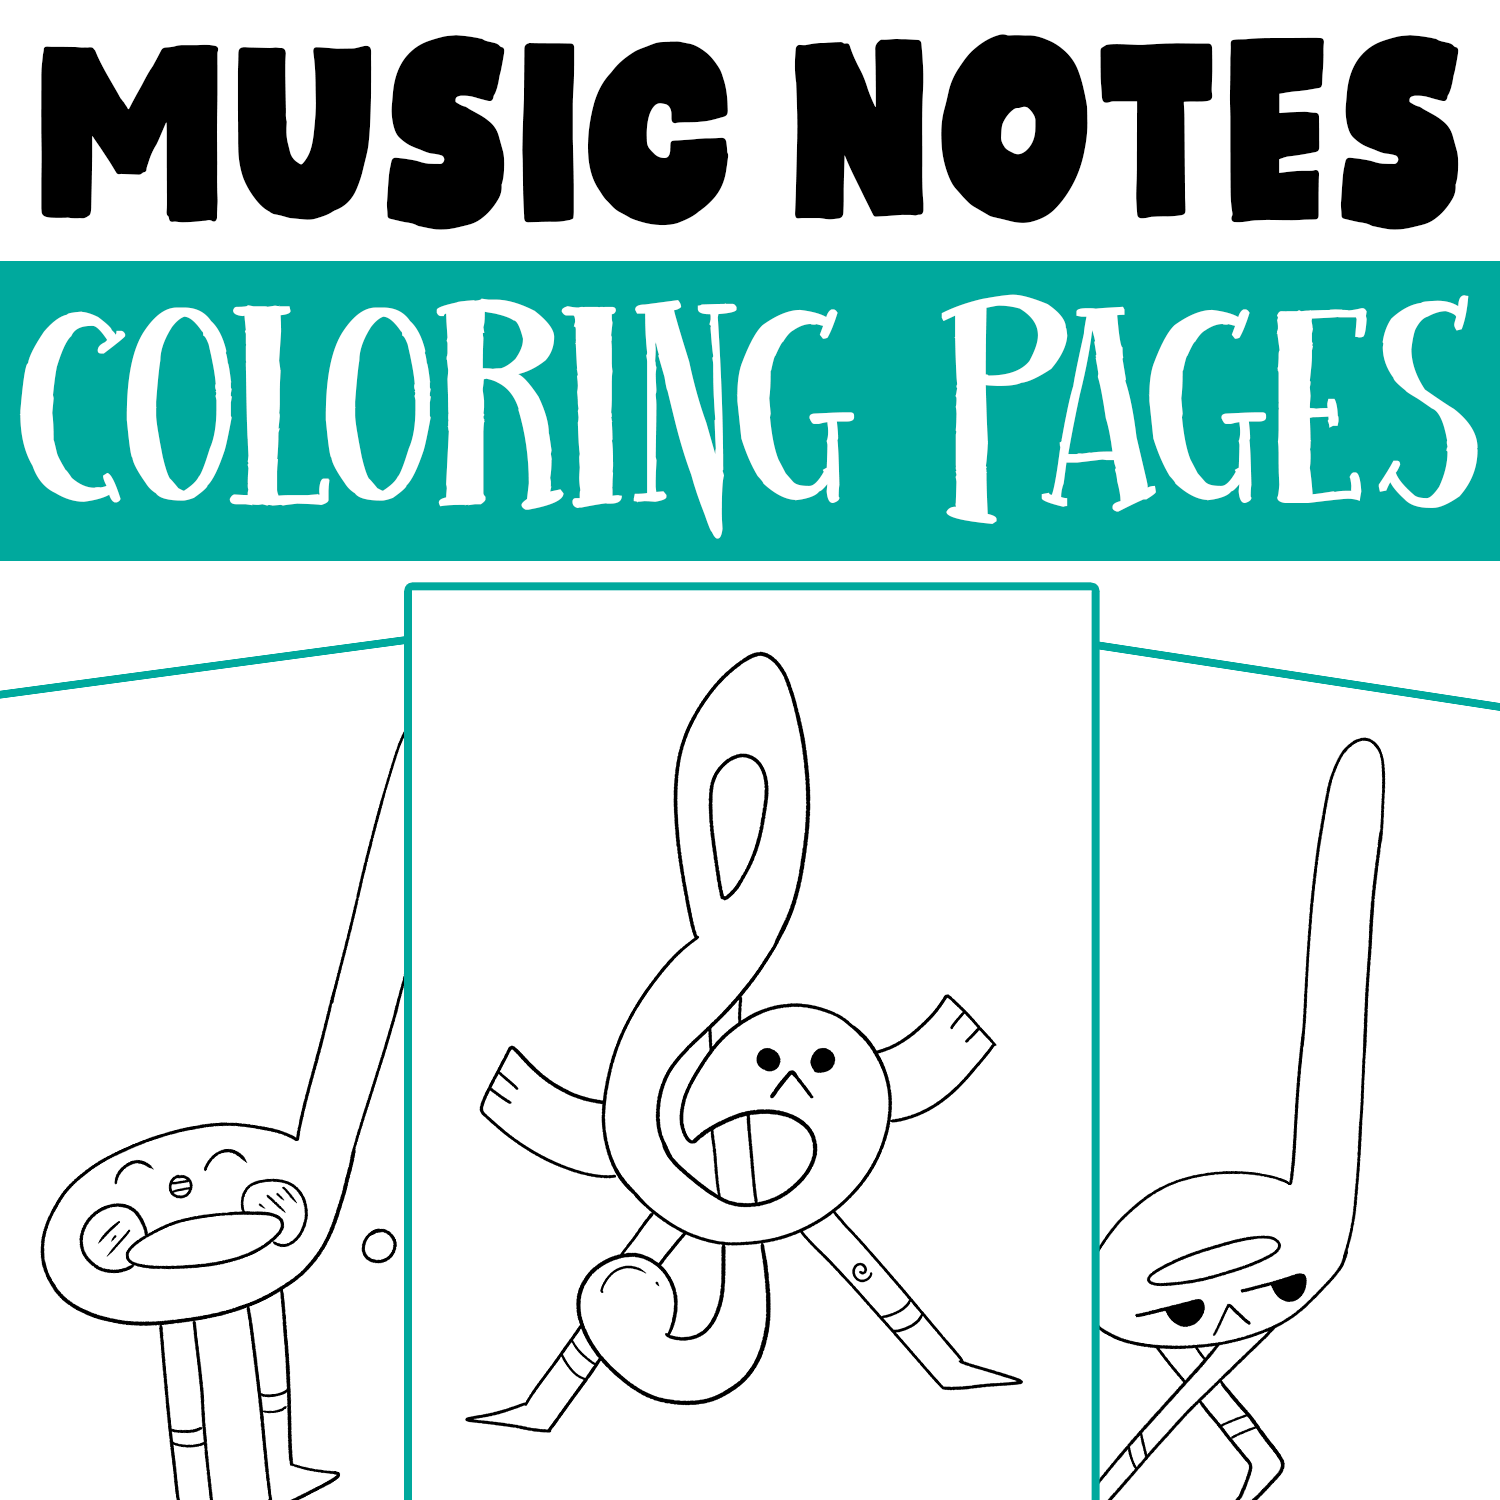 Music notes coloring pages for kids music theory coloring worksheet made by teachers